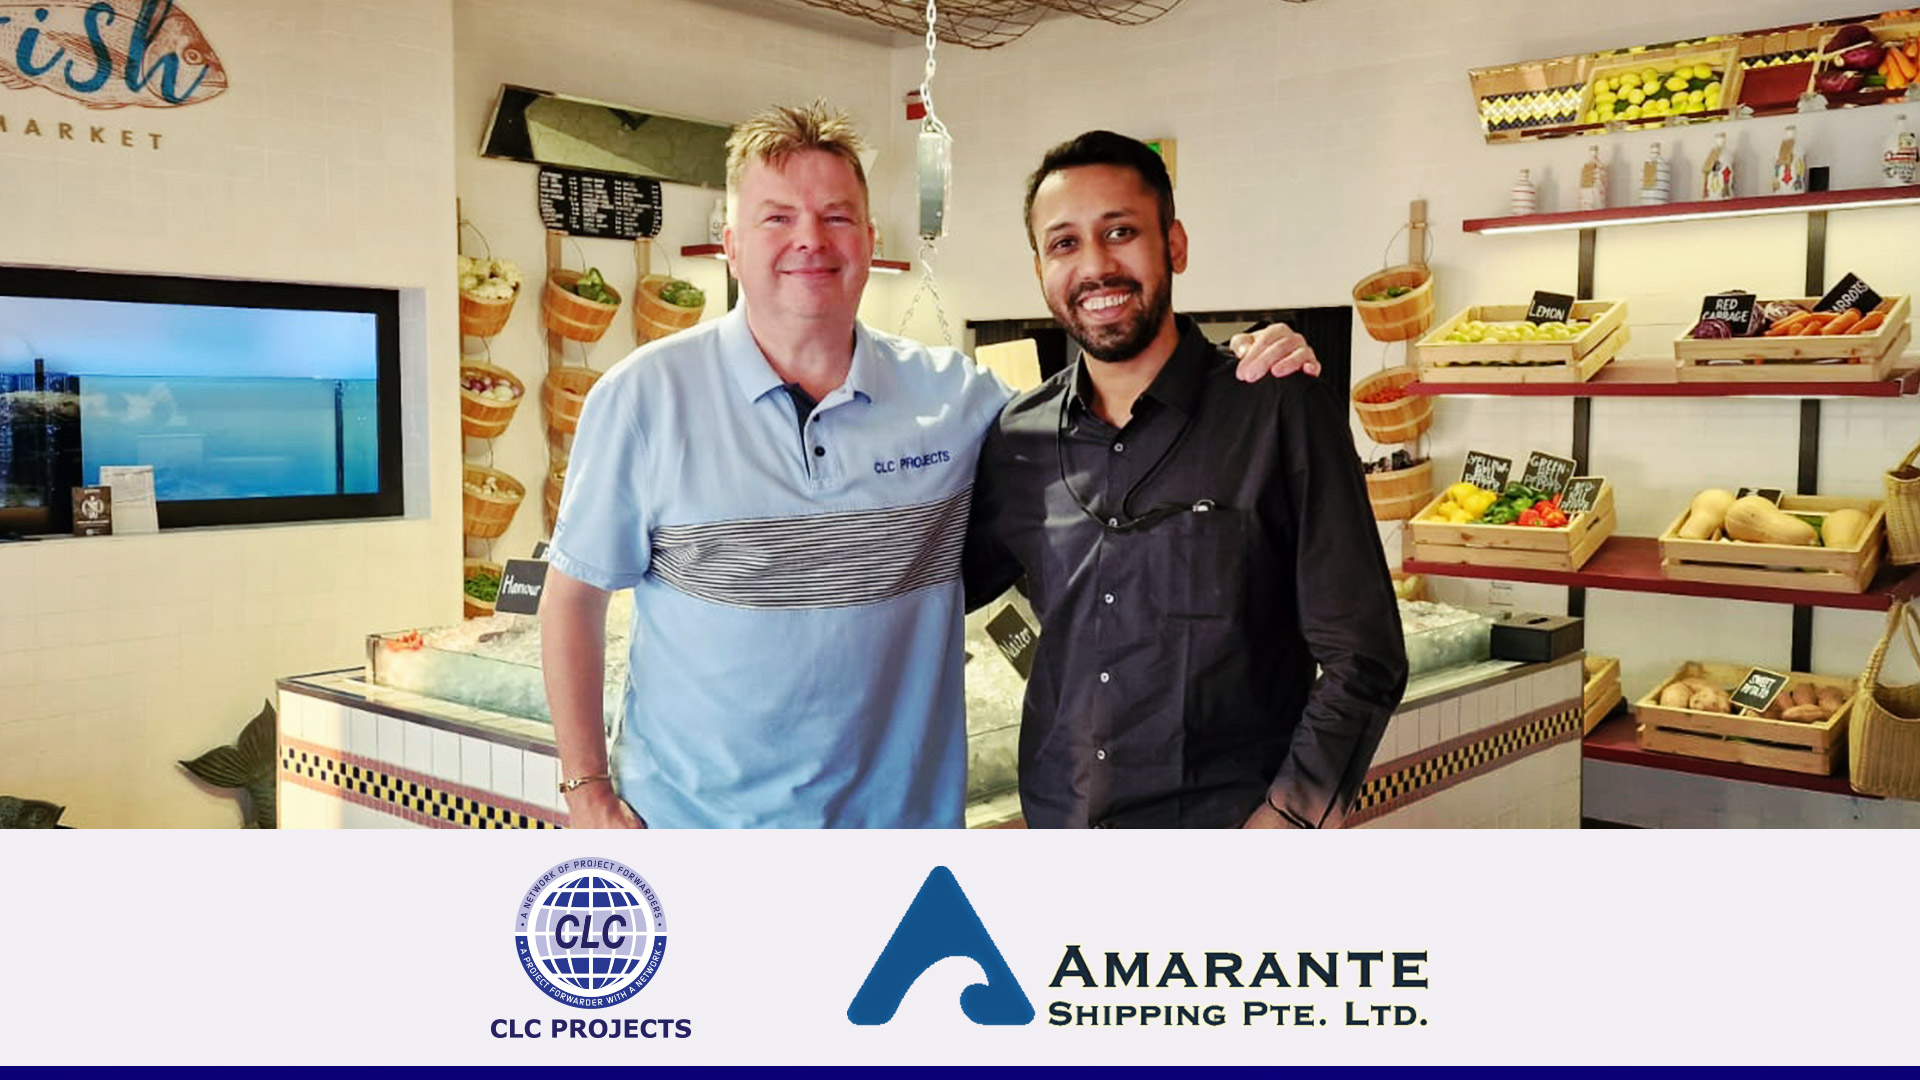 CLC Projects Chairman with Mrinal Shah, Operations Manager at Amarante Shipping in Dubai UAE